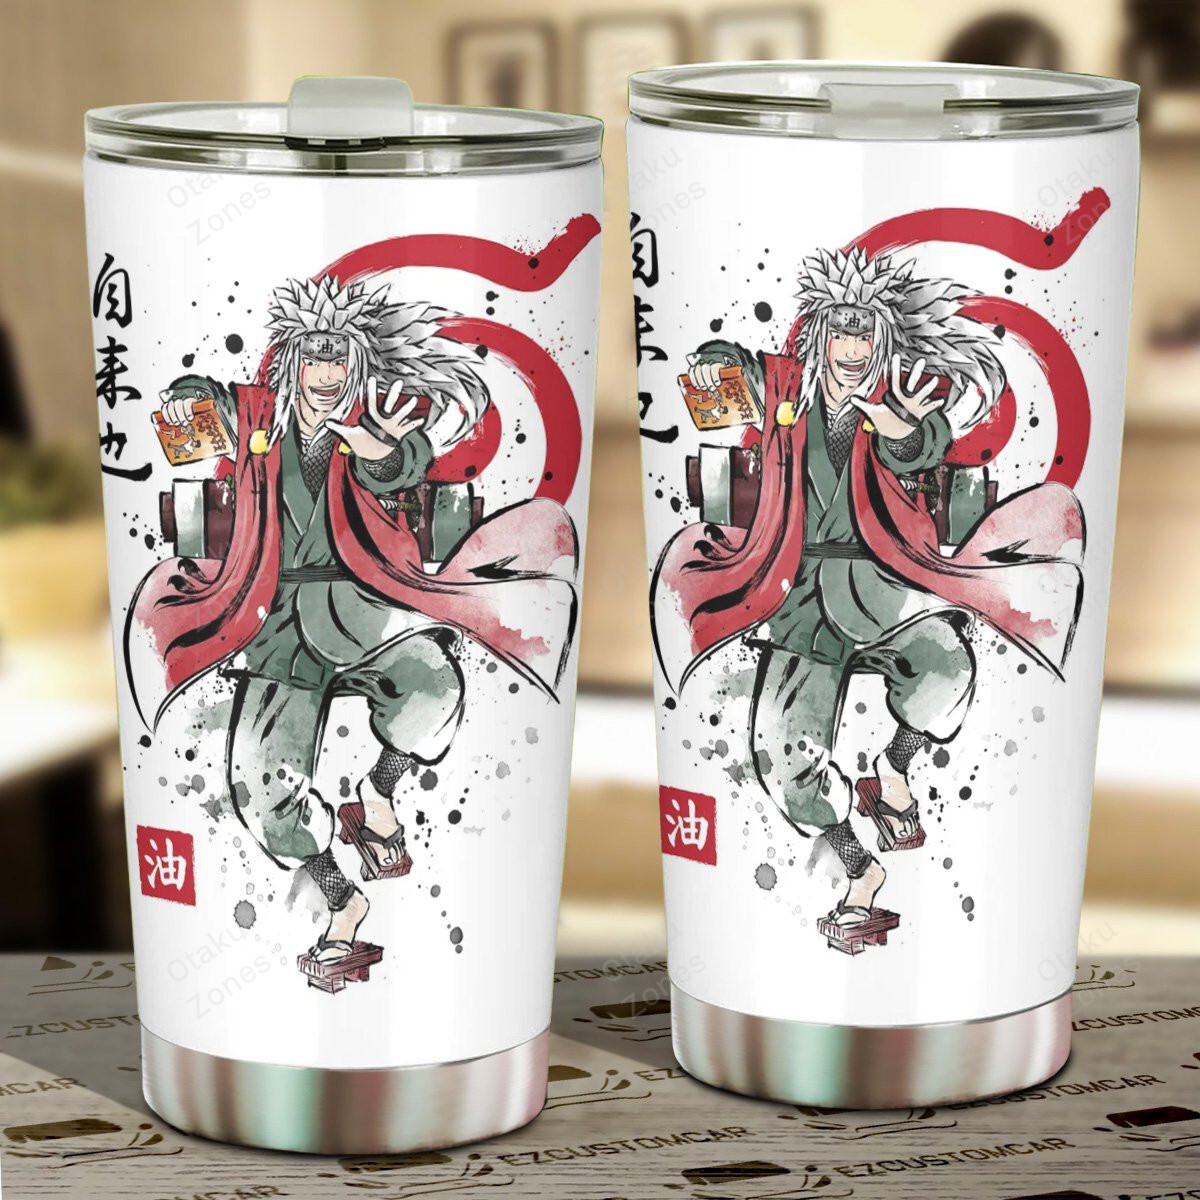 Go ahead and order your new tumbler now! 60